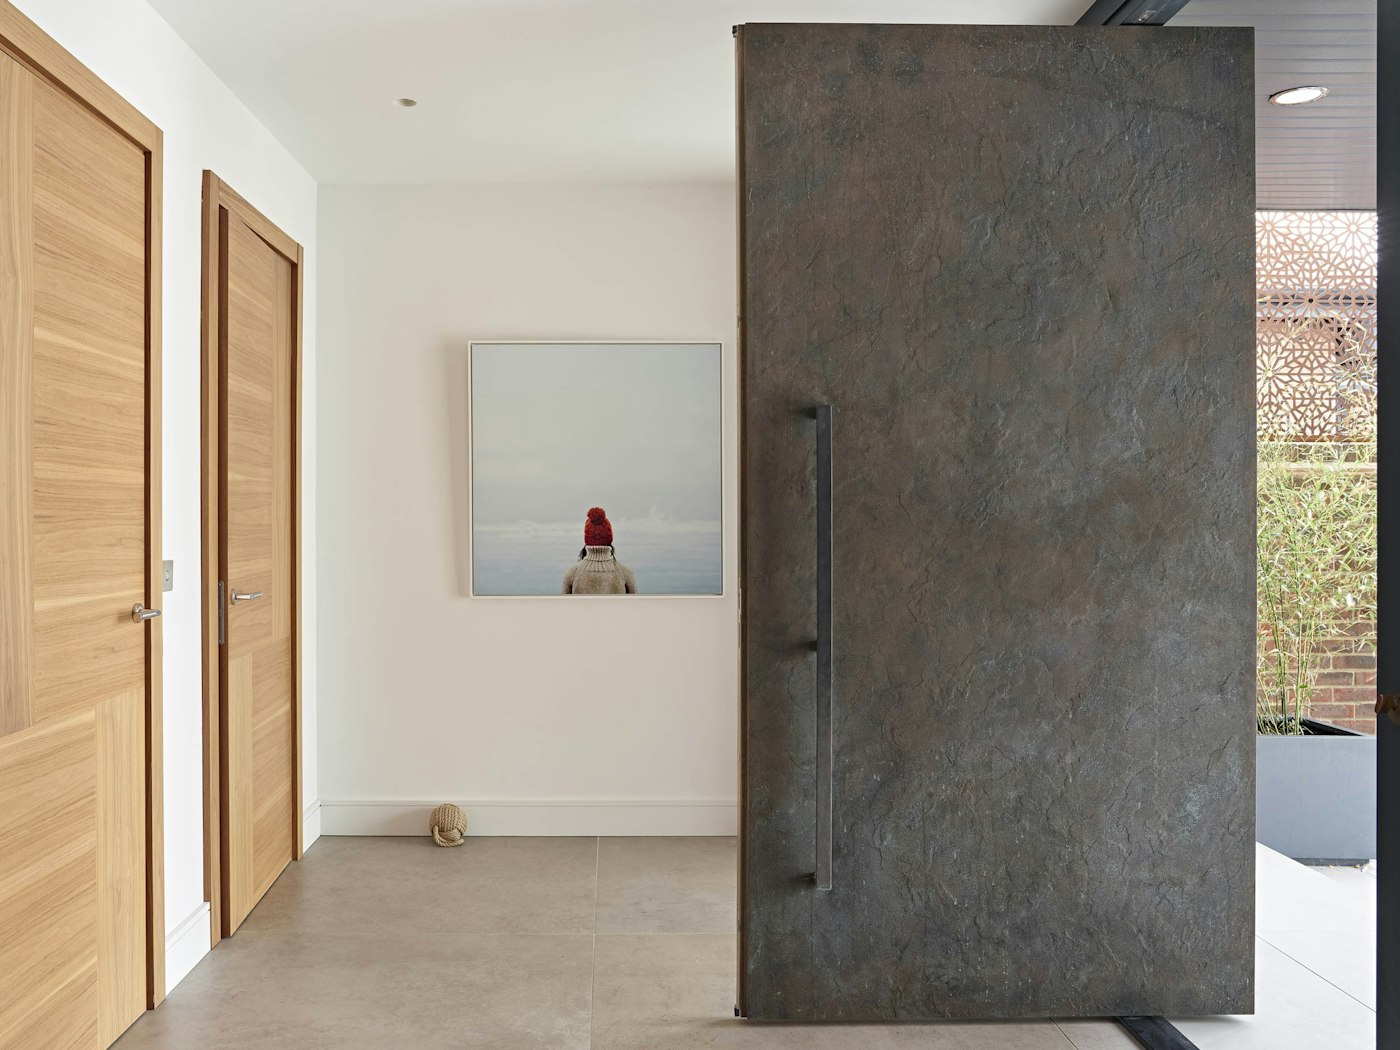 Another Bronze 101 - this door is situated right by the sea & some natural light oxidisation of the metal has started to occur. Oxidisation can be prevented/slowed down with regular maintenance but many clients like the way the metal naturally evolves